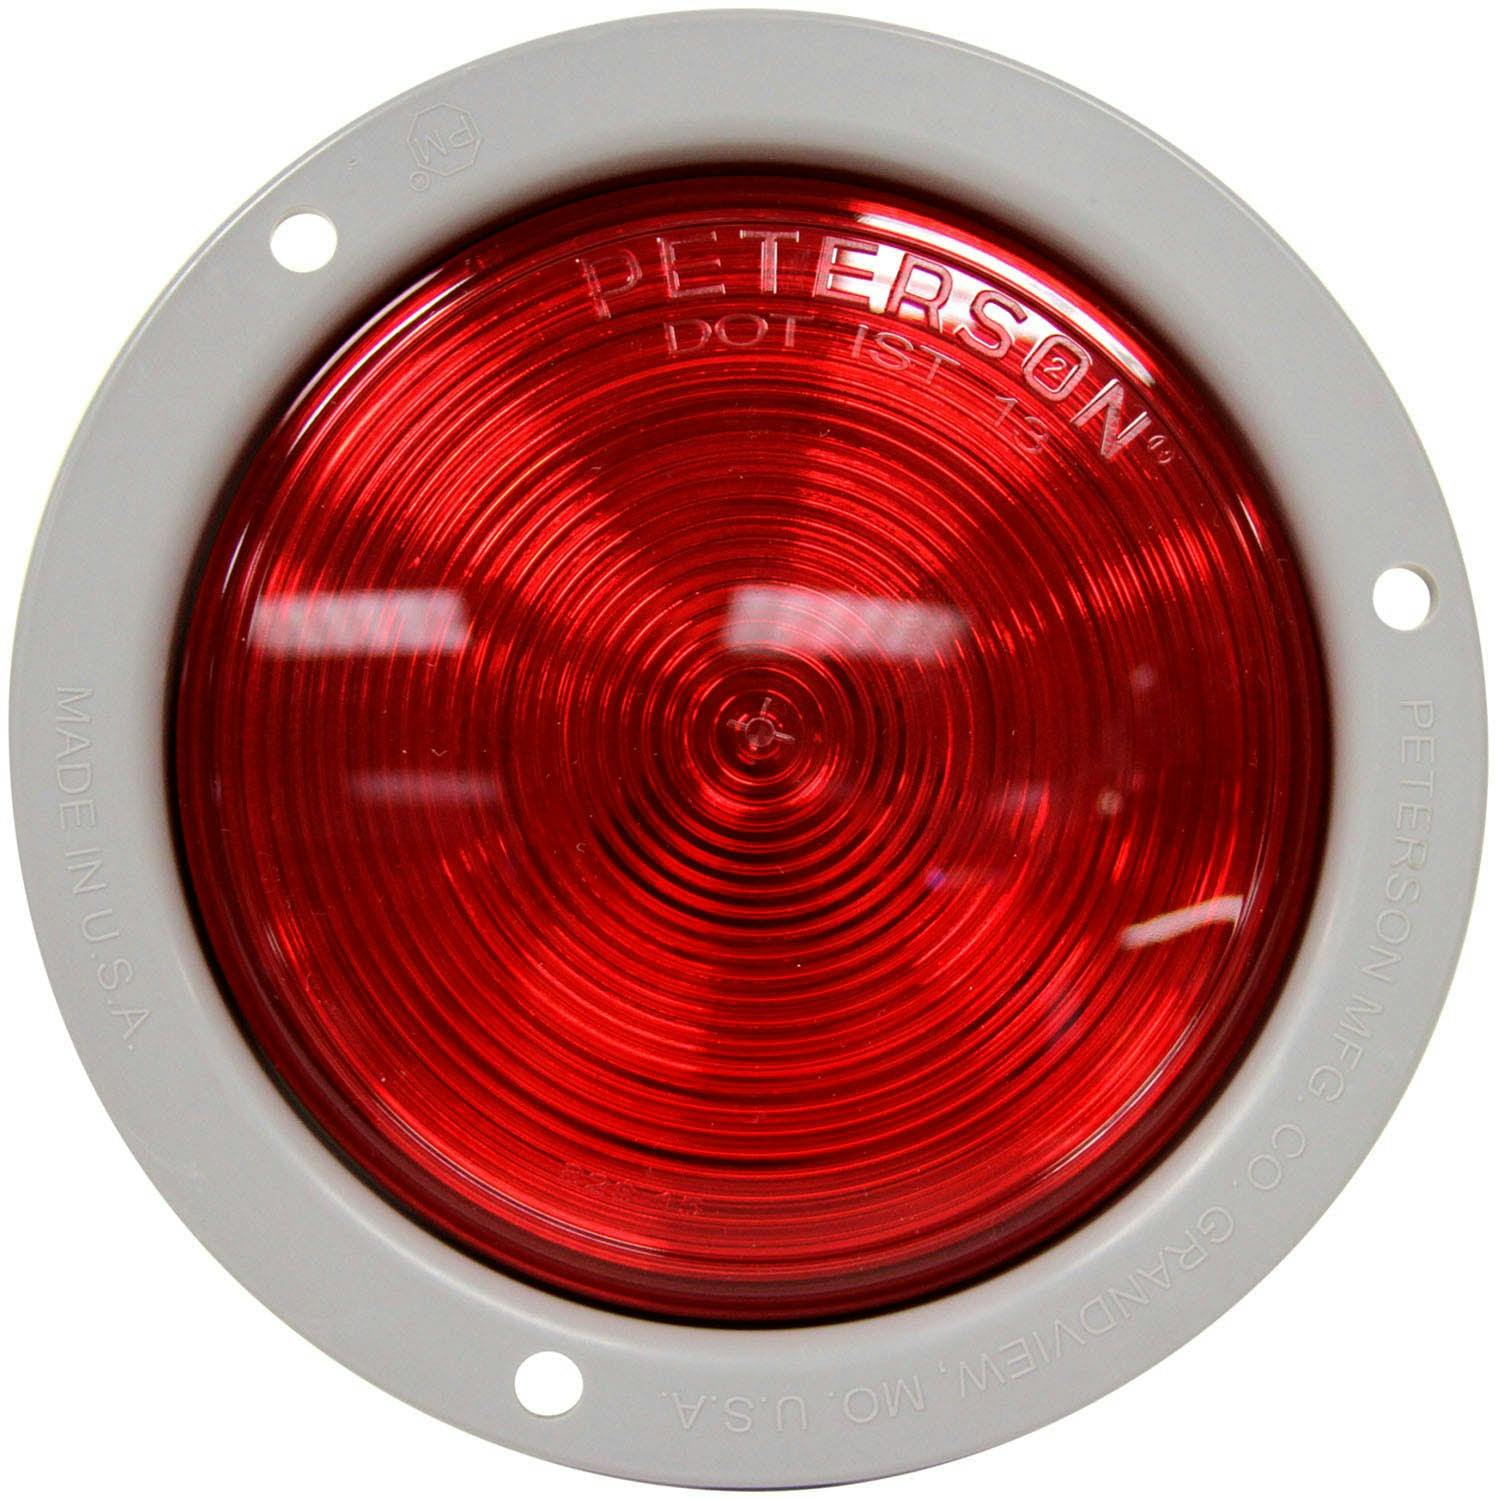 LED Stop/Turn/Tail, Round, Single Diode, Flange-Mount 4", red (Pack of 6)